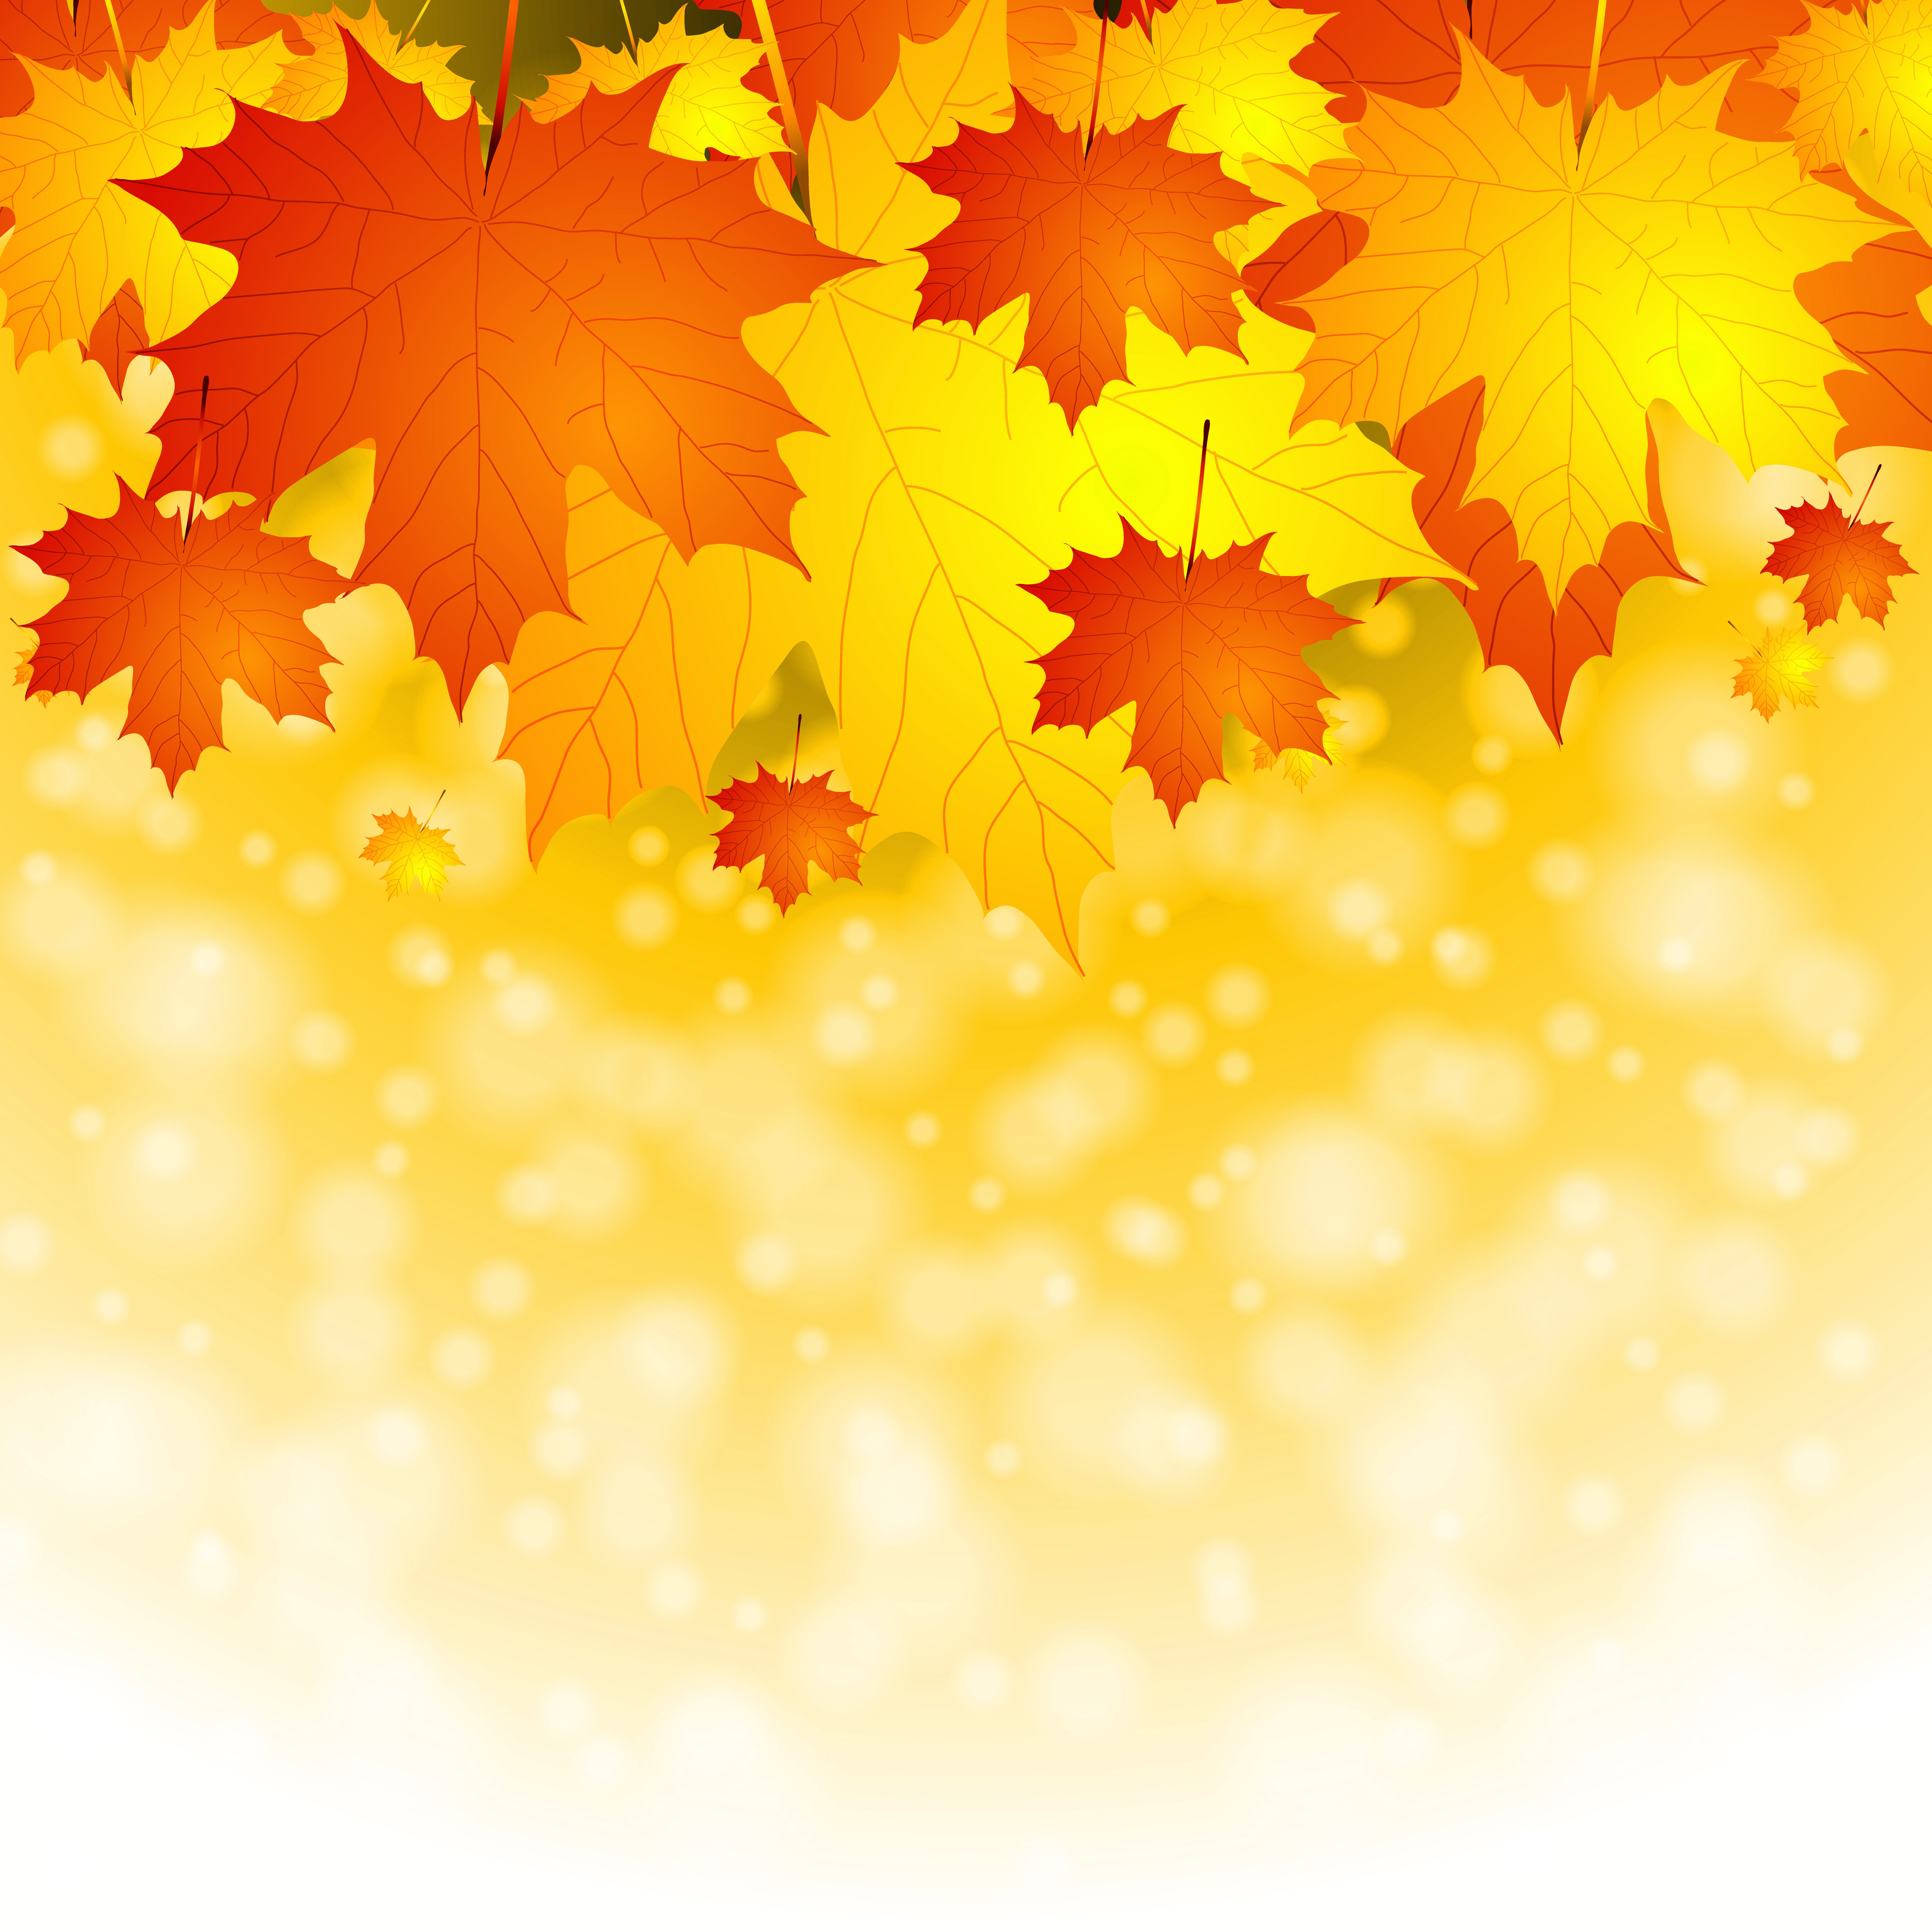 Free Fall Background Cliparts, Download Free Clip Art, Free.